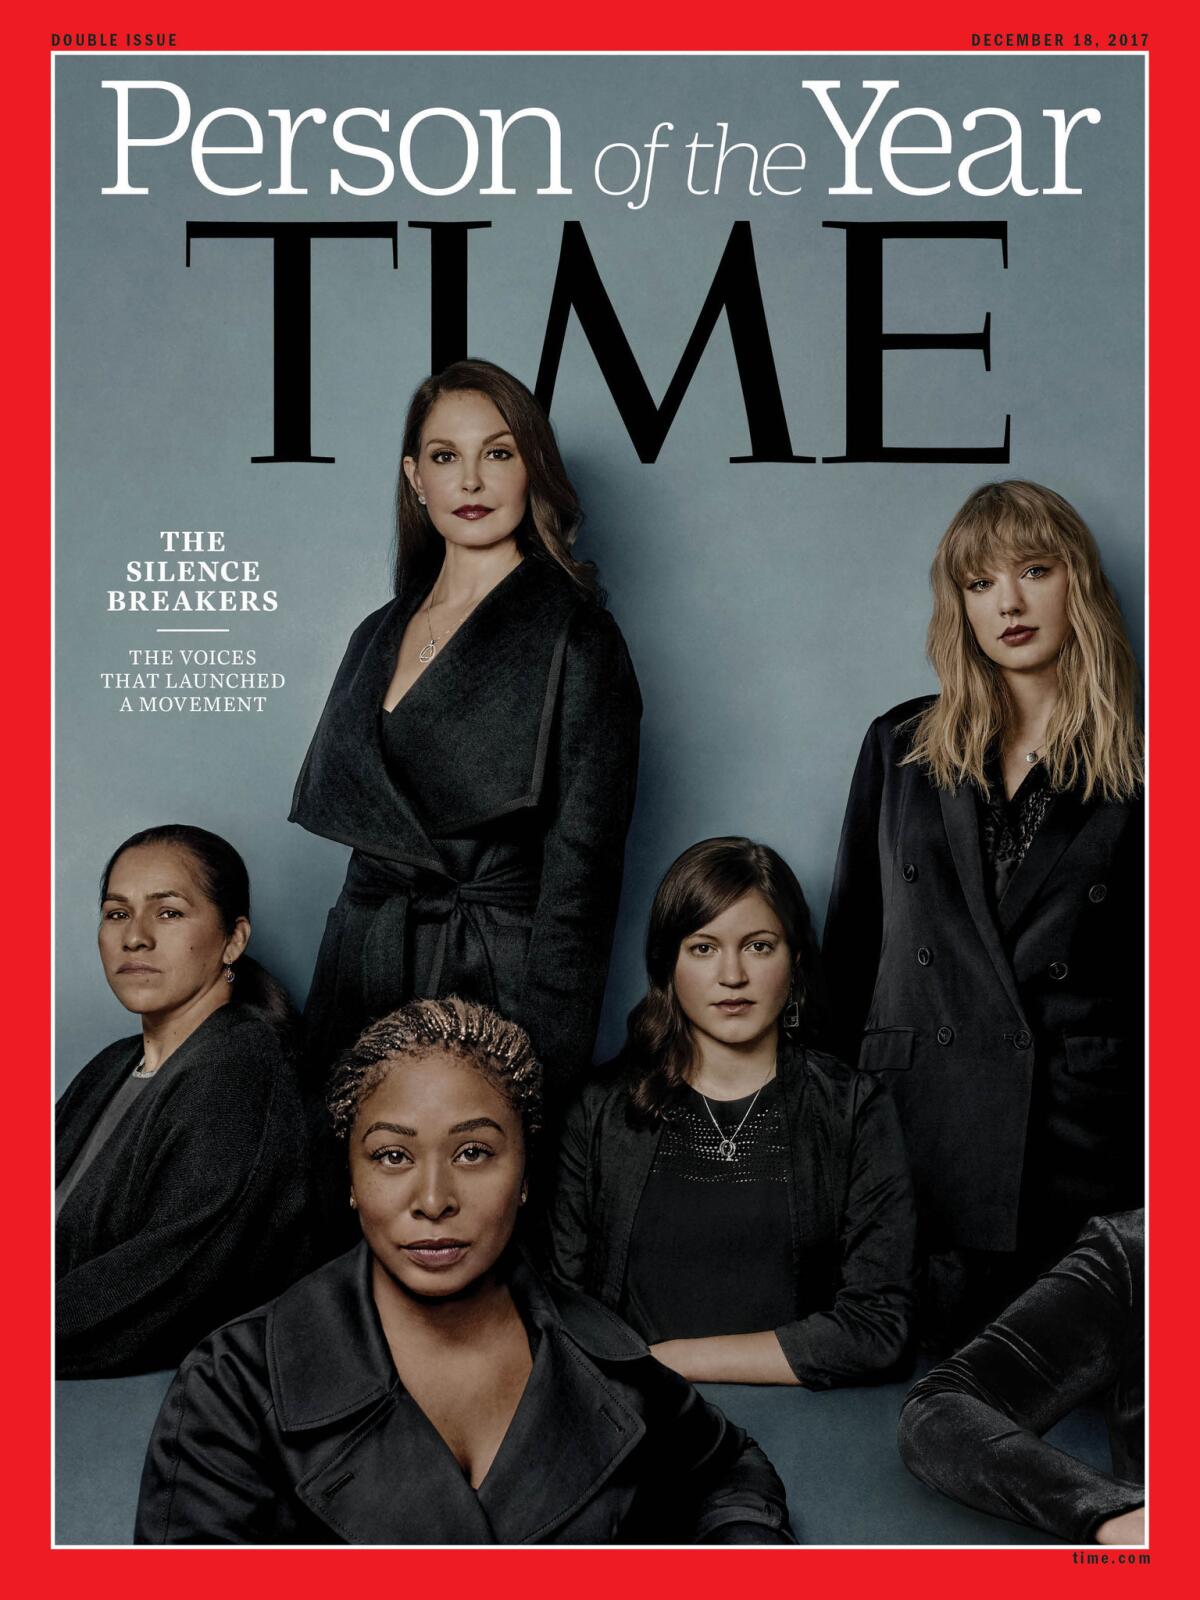 The 2017 Time magazine cover featuring Ashley Judd, Susan Fowler, Adama Iwu, Taylor Swift and Isabel Pascual.